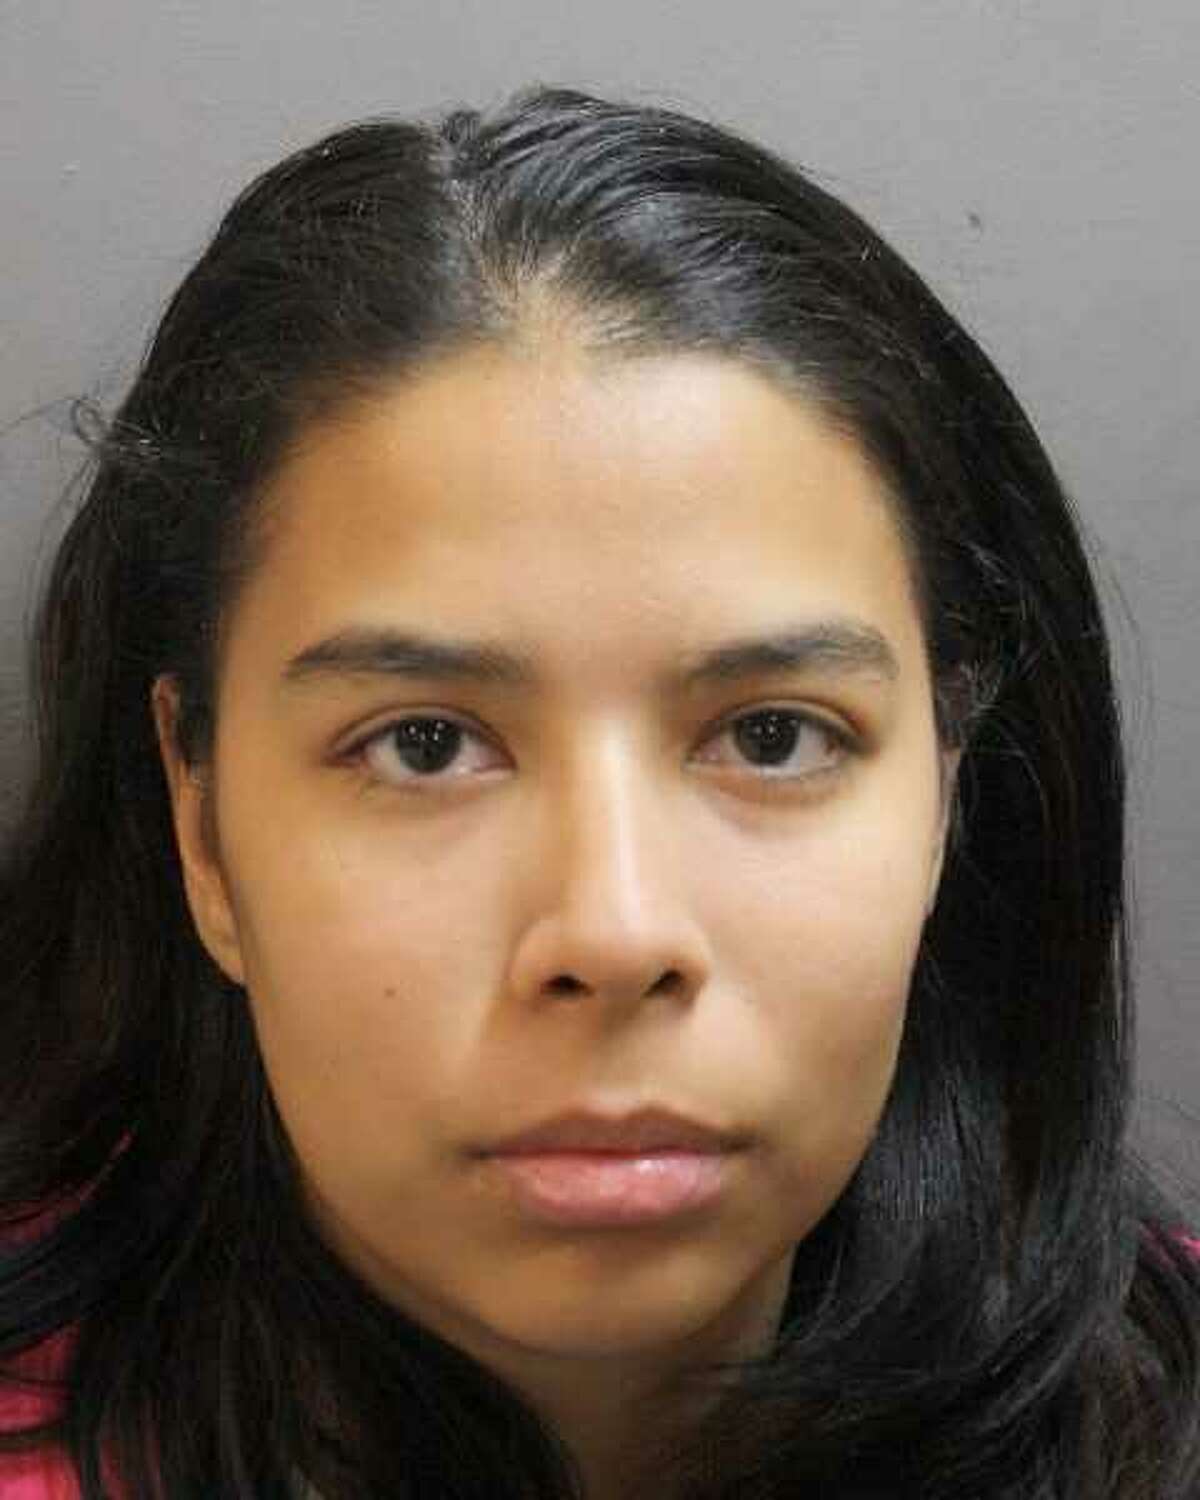 Name: Teresa Henry Date of Birth: 05/20/1997 Age: 20 Charge(s): Human Trafficking of a Minor (1st Degree Felony), and Compelling Prostitution of a Minor (1st Degree Felony) Bond Amount: $100,000.00 Court: 180th District Court Current Disposition: CURRENTLY IN JAIL